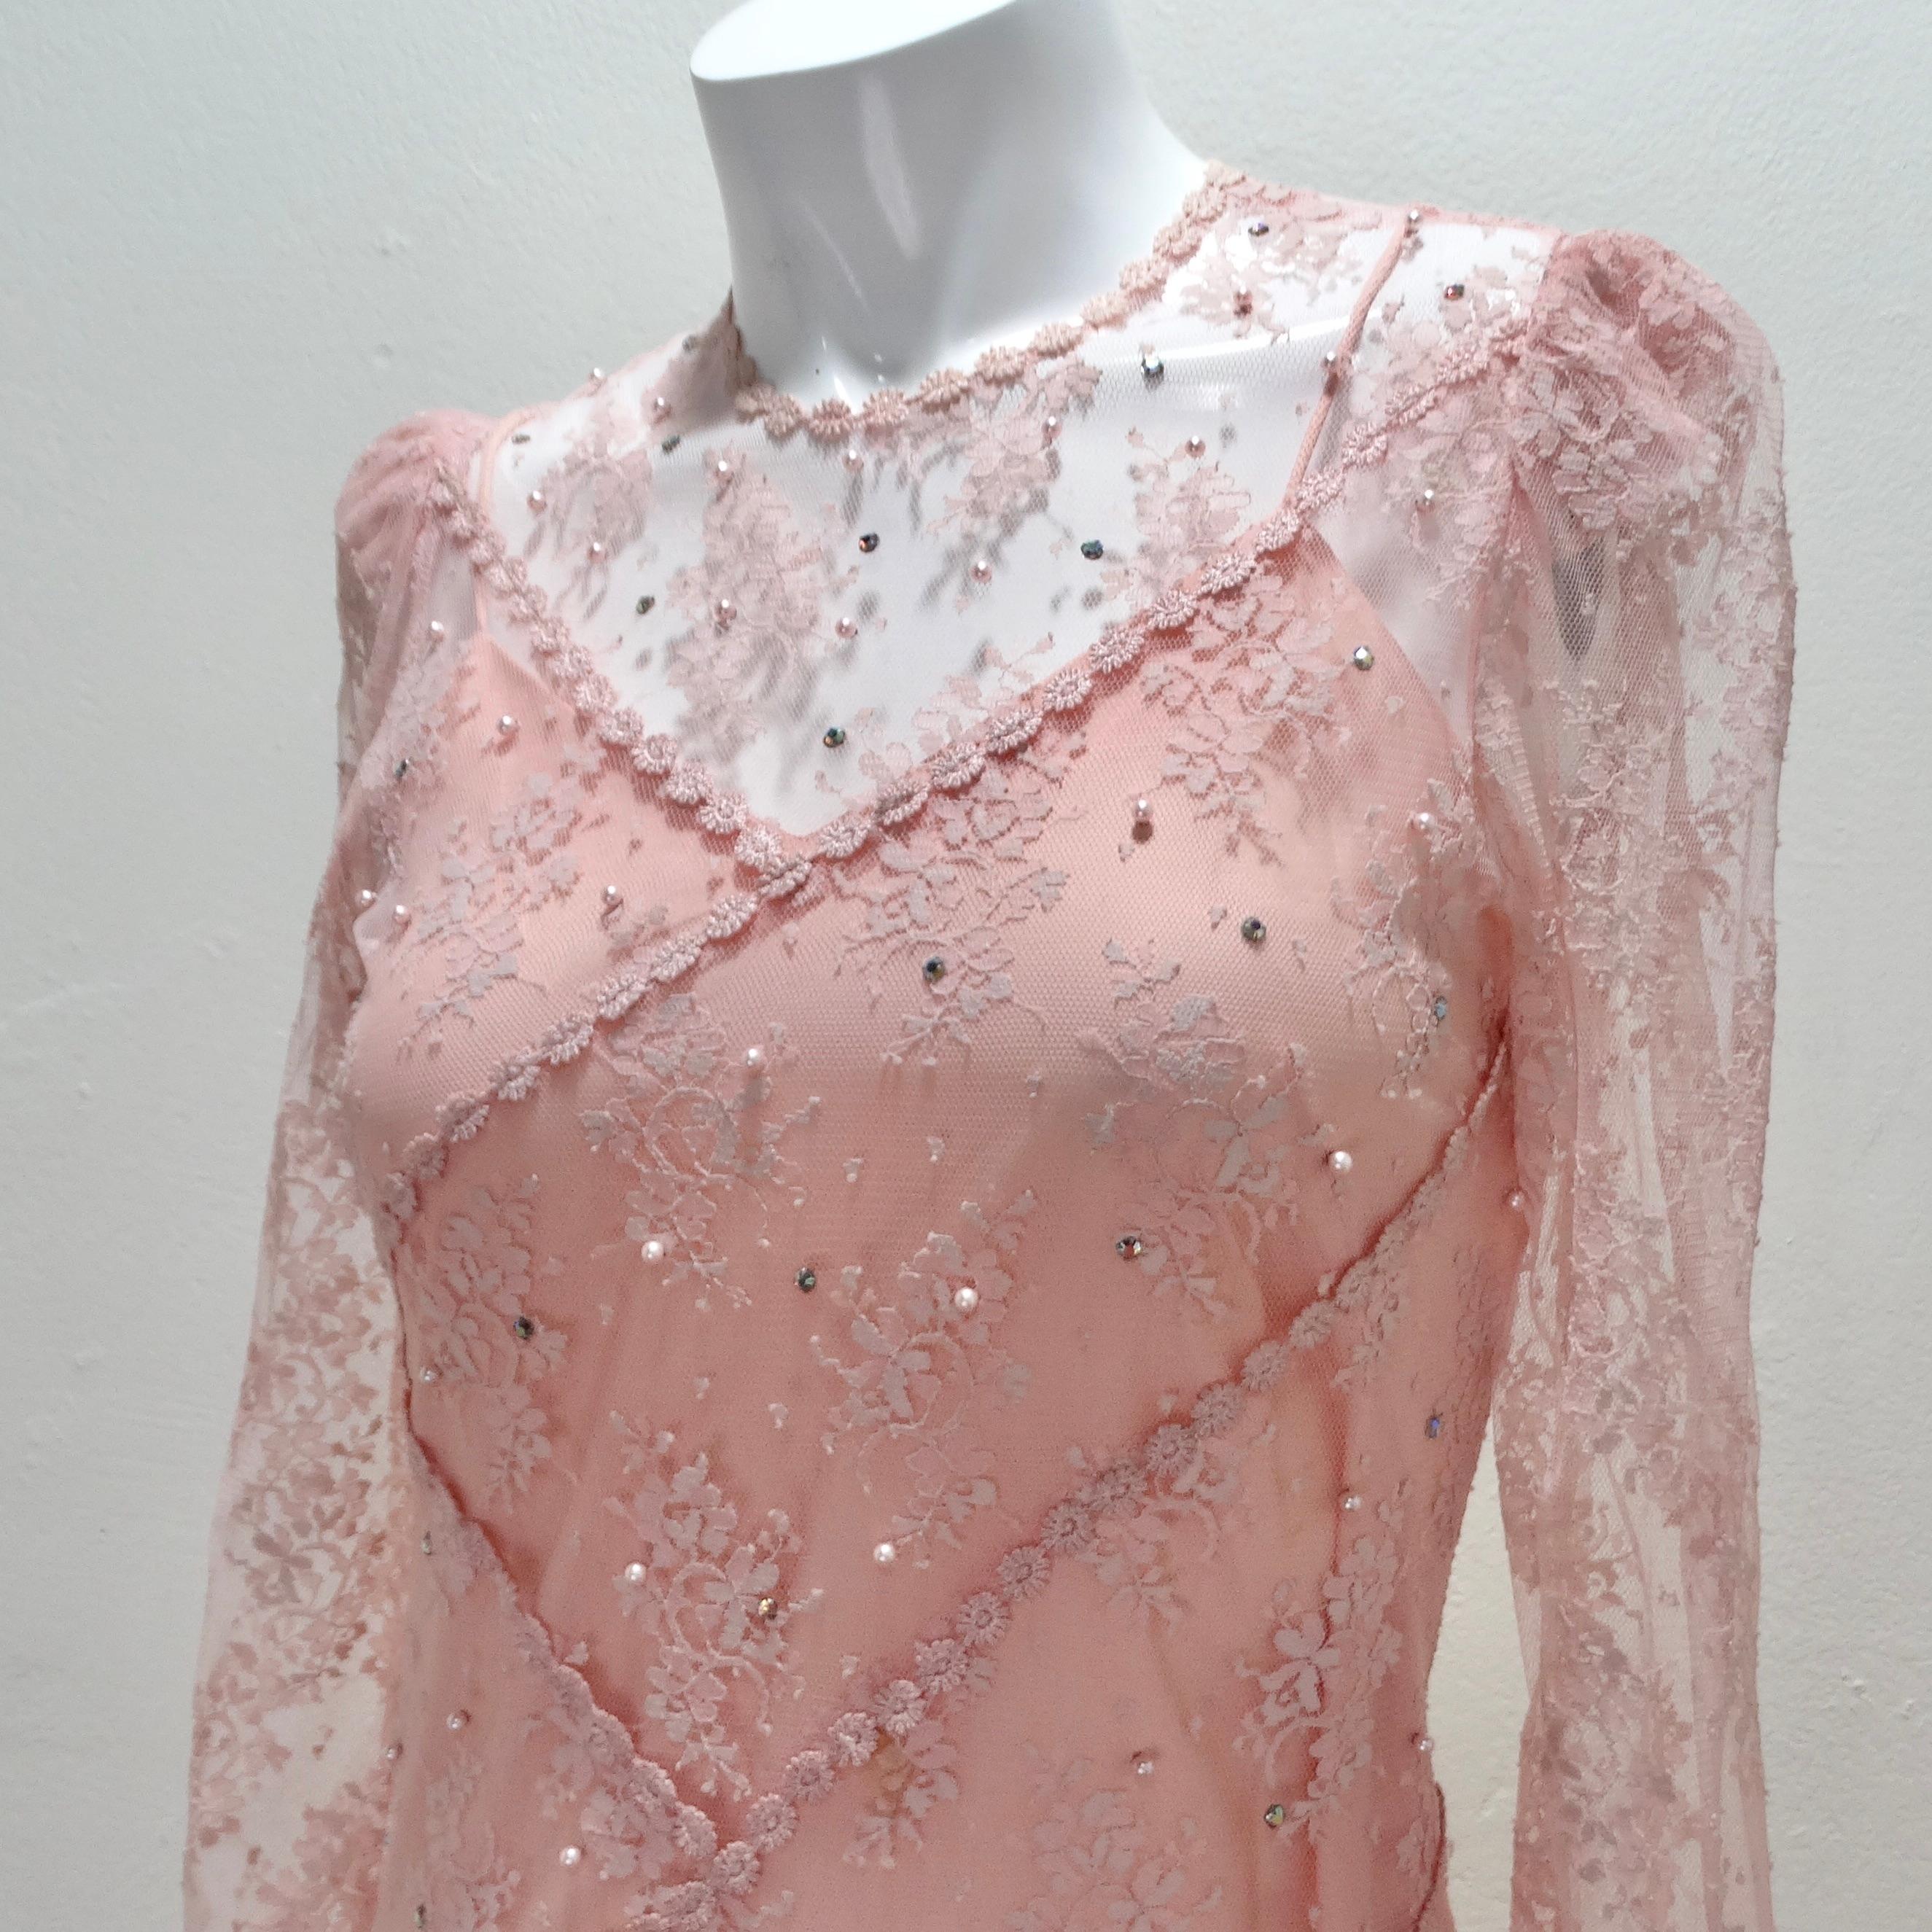 1980s Pink Lace Layered Slip & Long Sleeve Dress In Good Condition For Sale In Scottsdale, AZ